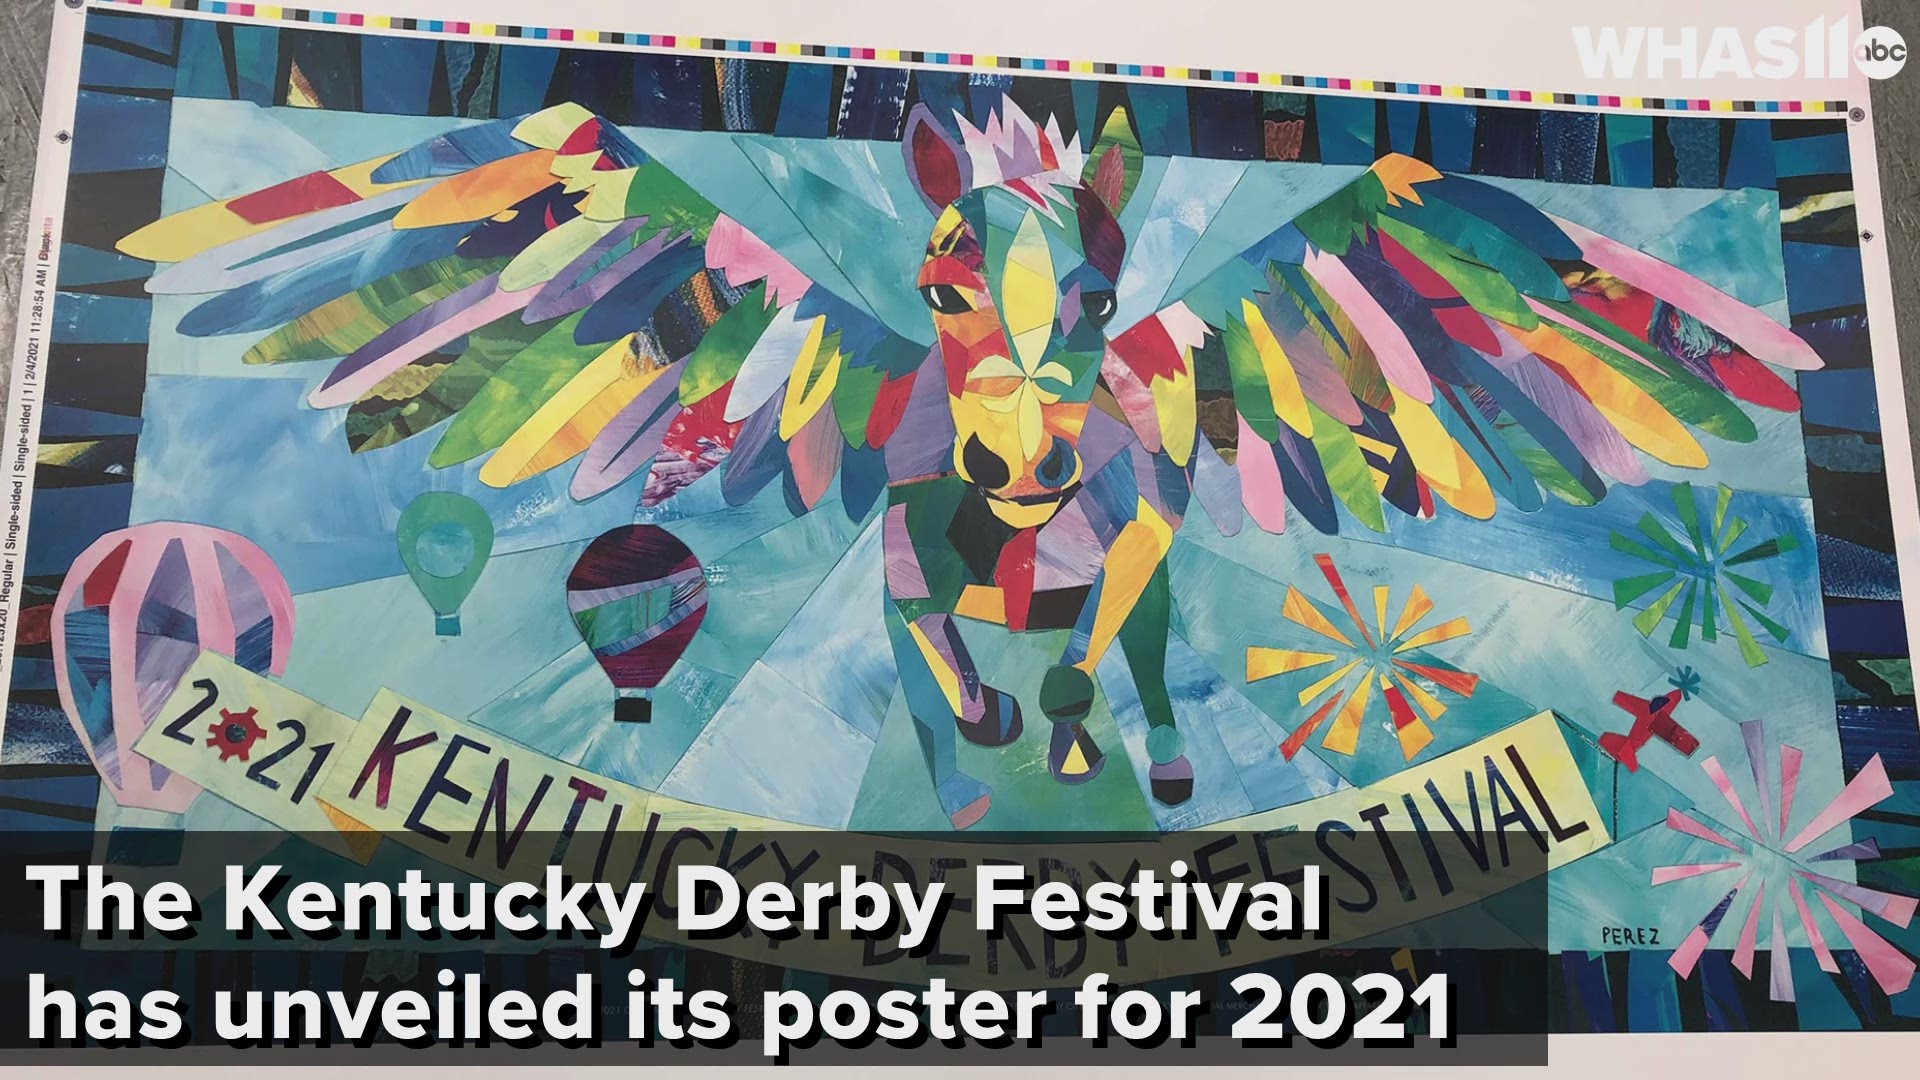 The poster, created by Louisville artist Andy Perez, is a collage of nine previous Derby Festival posters.